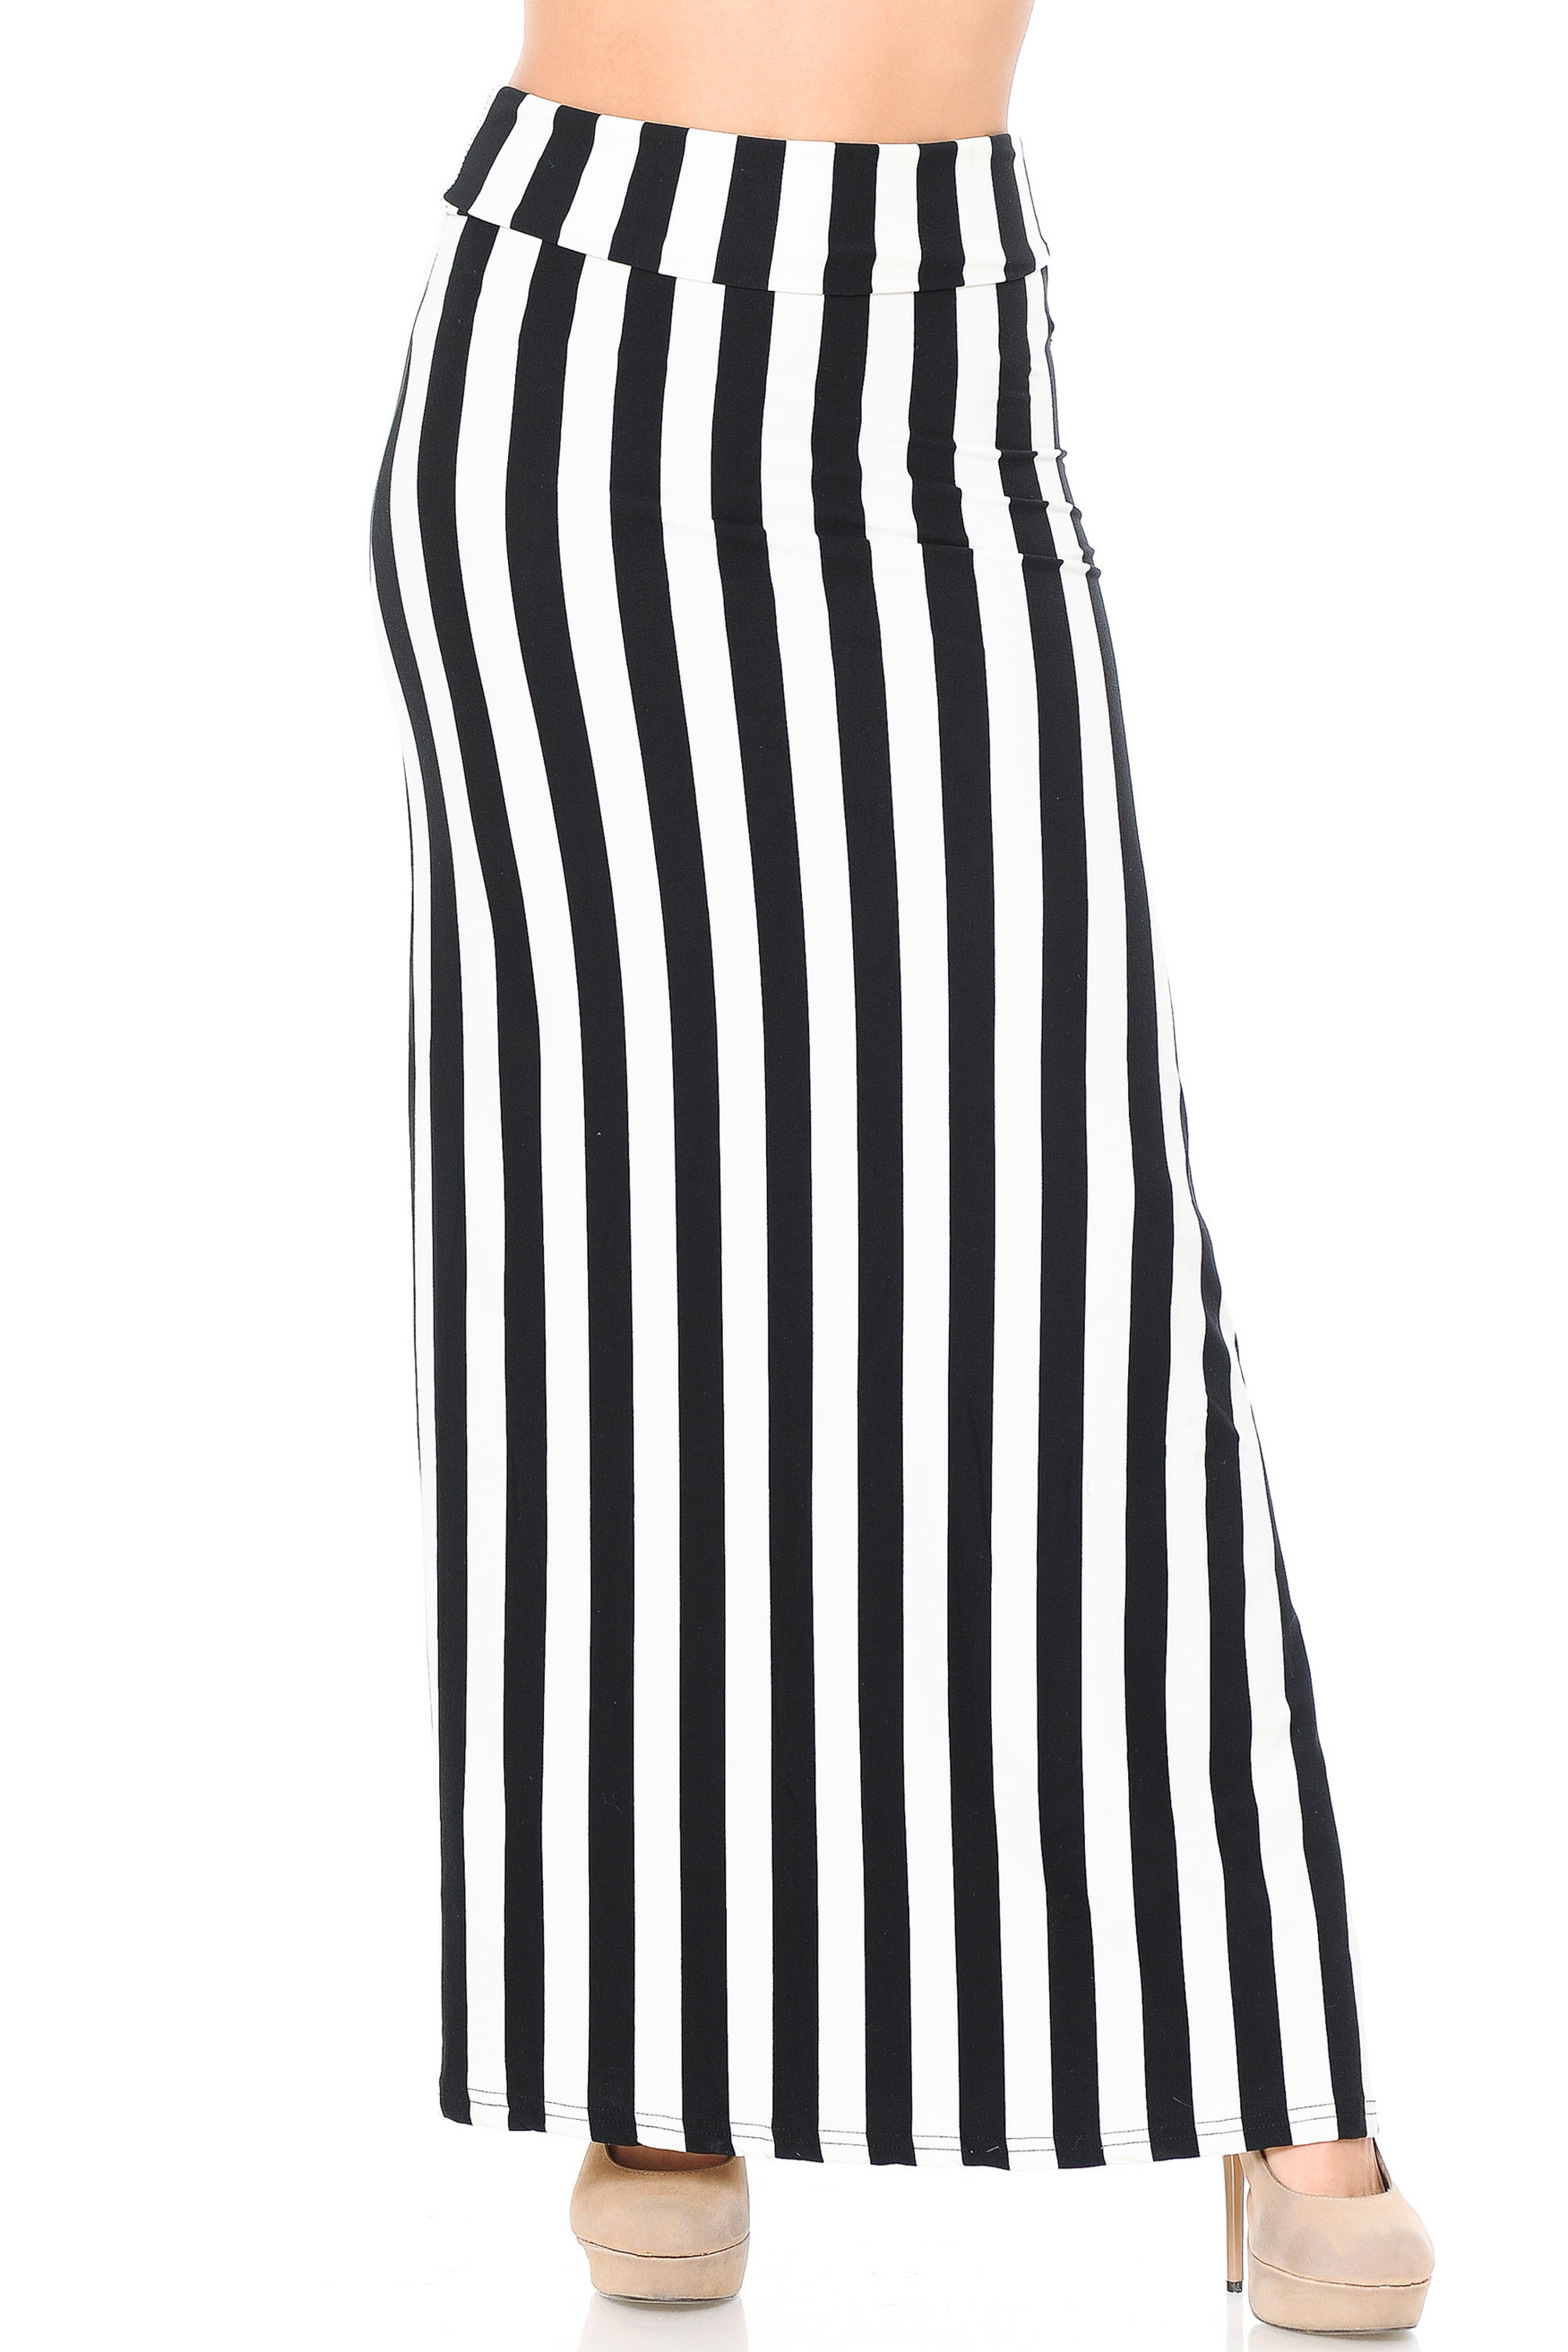 Black and White Wide Stripe Plus Size Buttery Soft Maxi Skirt